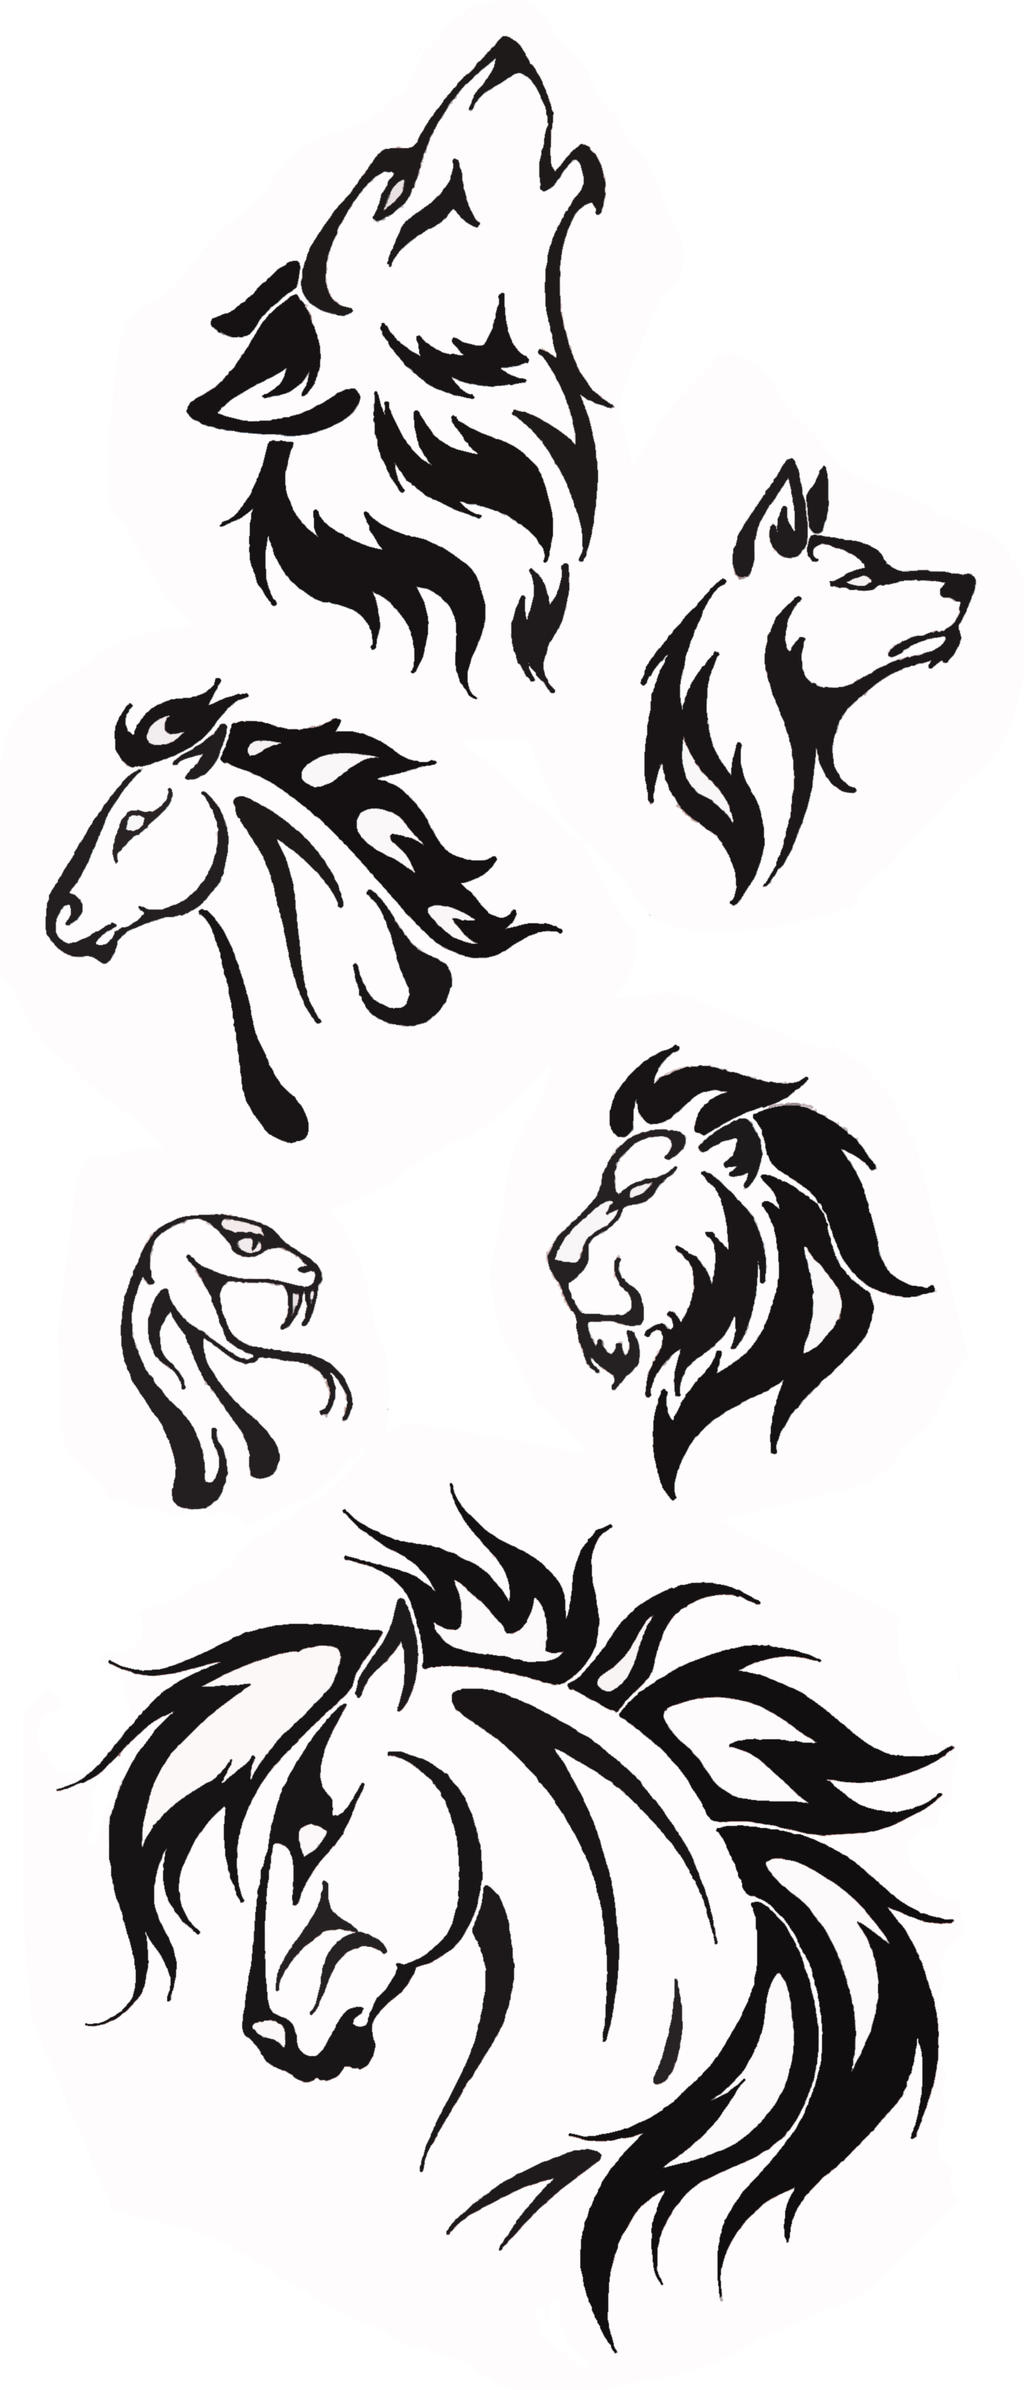 Simple Tribal Animal Designs by TheHellcow on DeviantArt